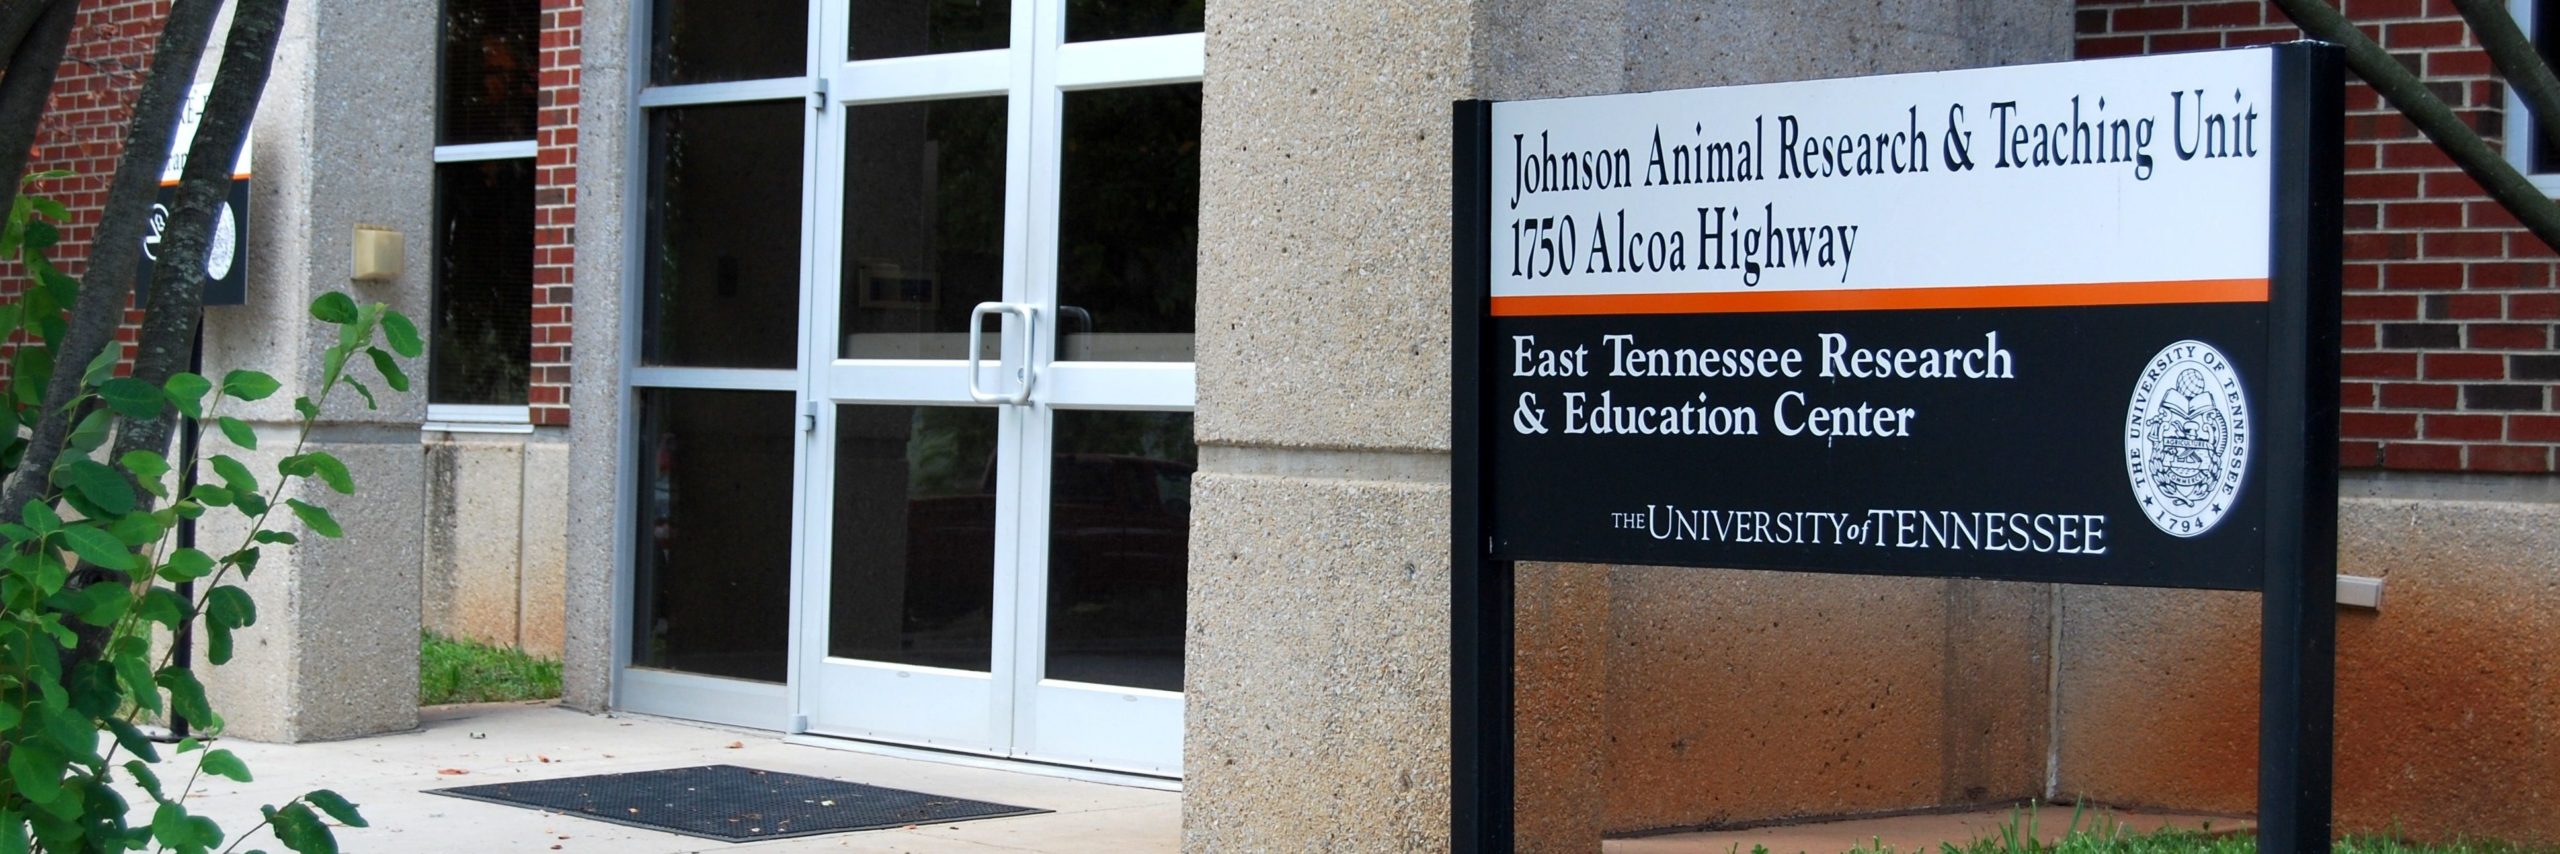 Sign in front of the JRTU Building 